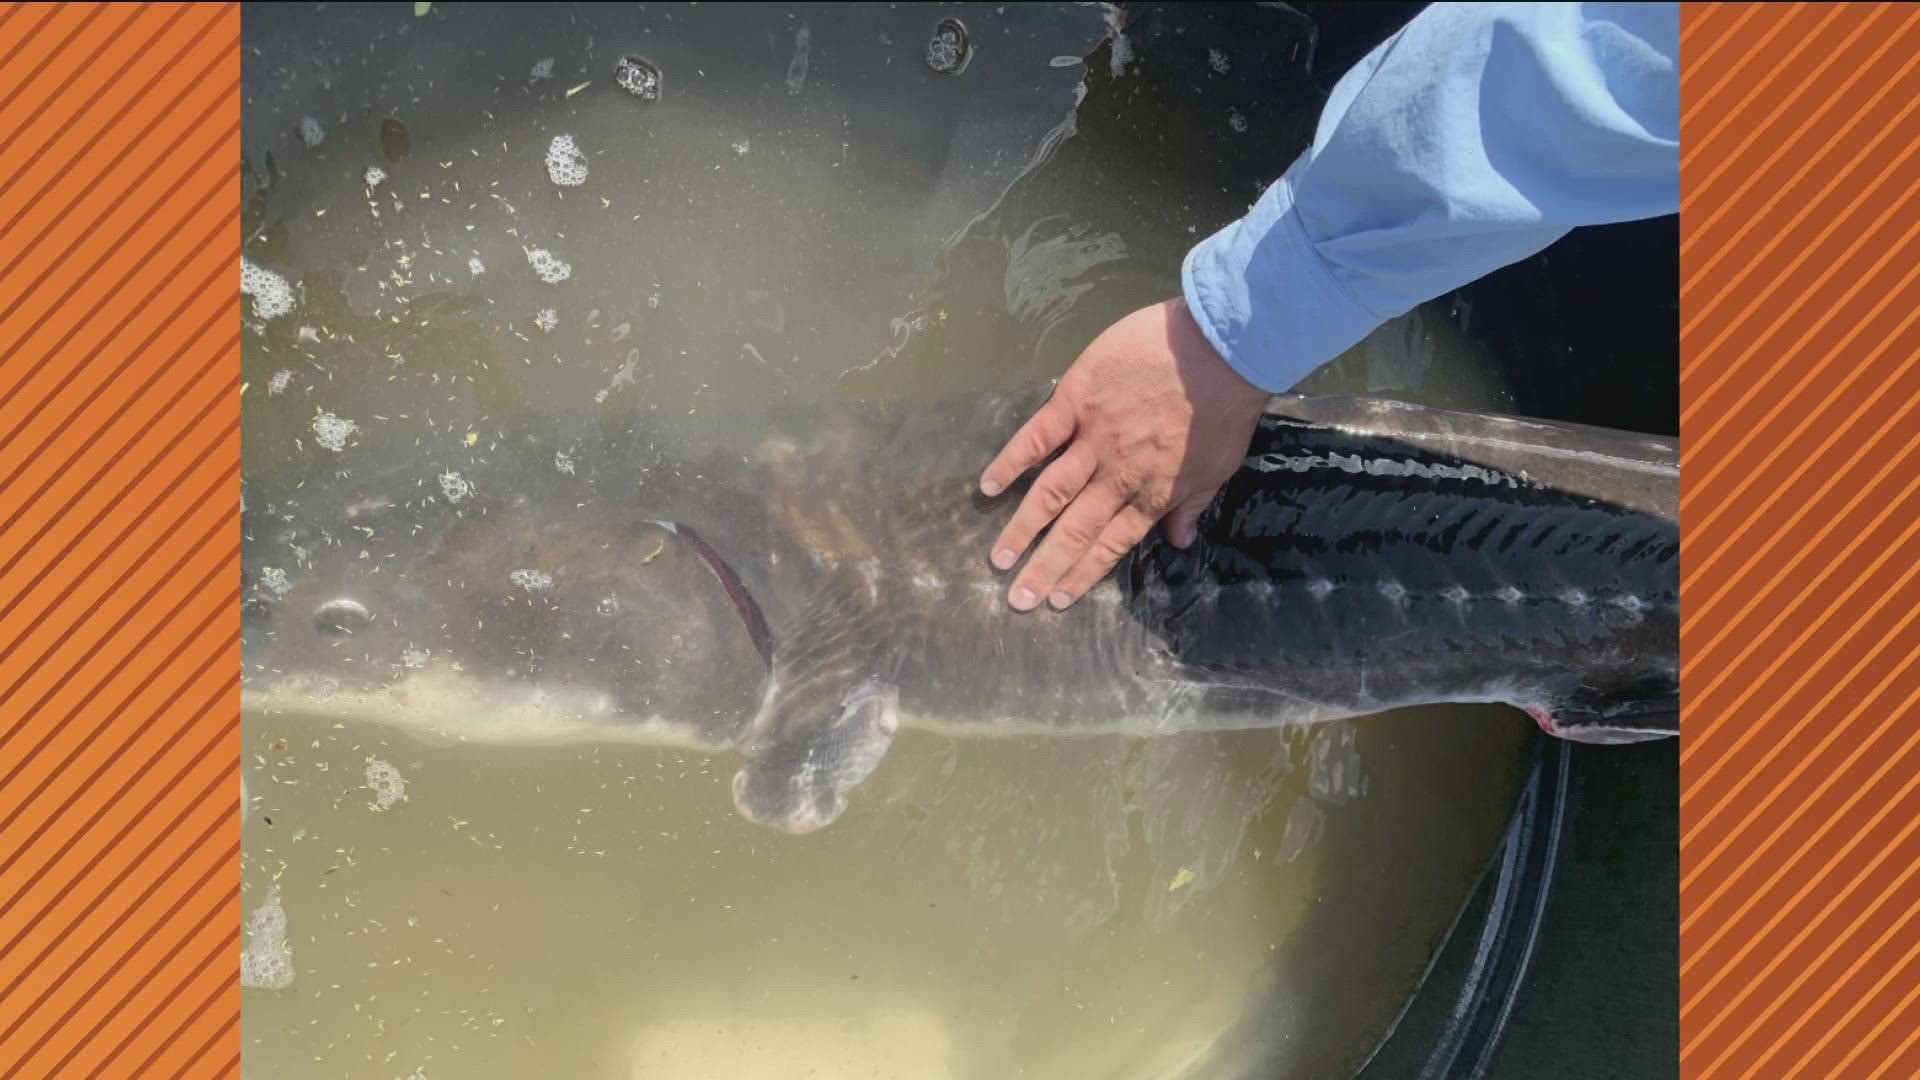 Idaho Fish and Game said the nearly 5-foot-long sturgeon was found swimming in the shallow Blackfoot canal with more than a third of its body above the water.